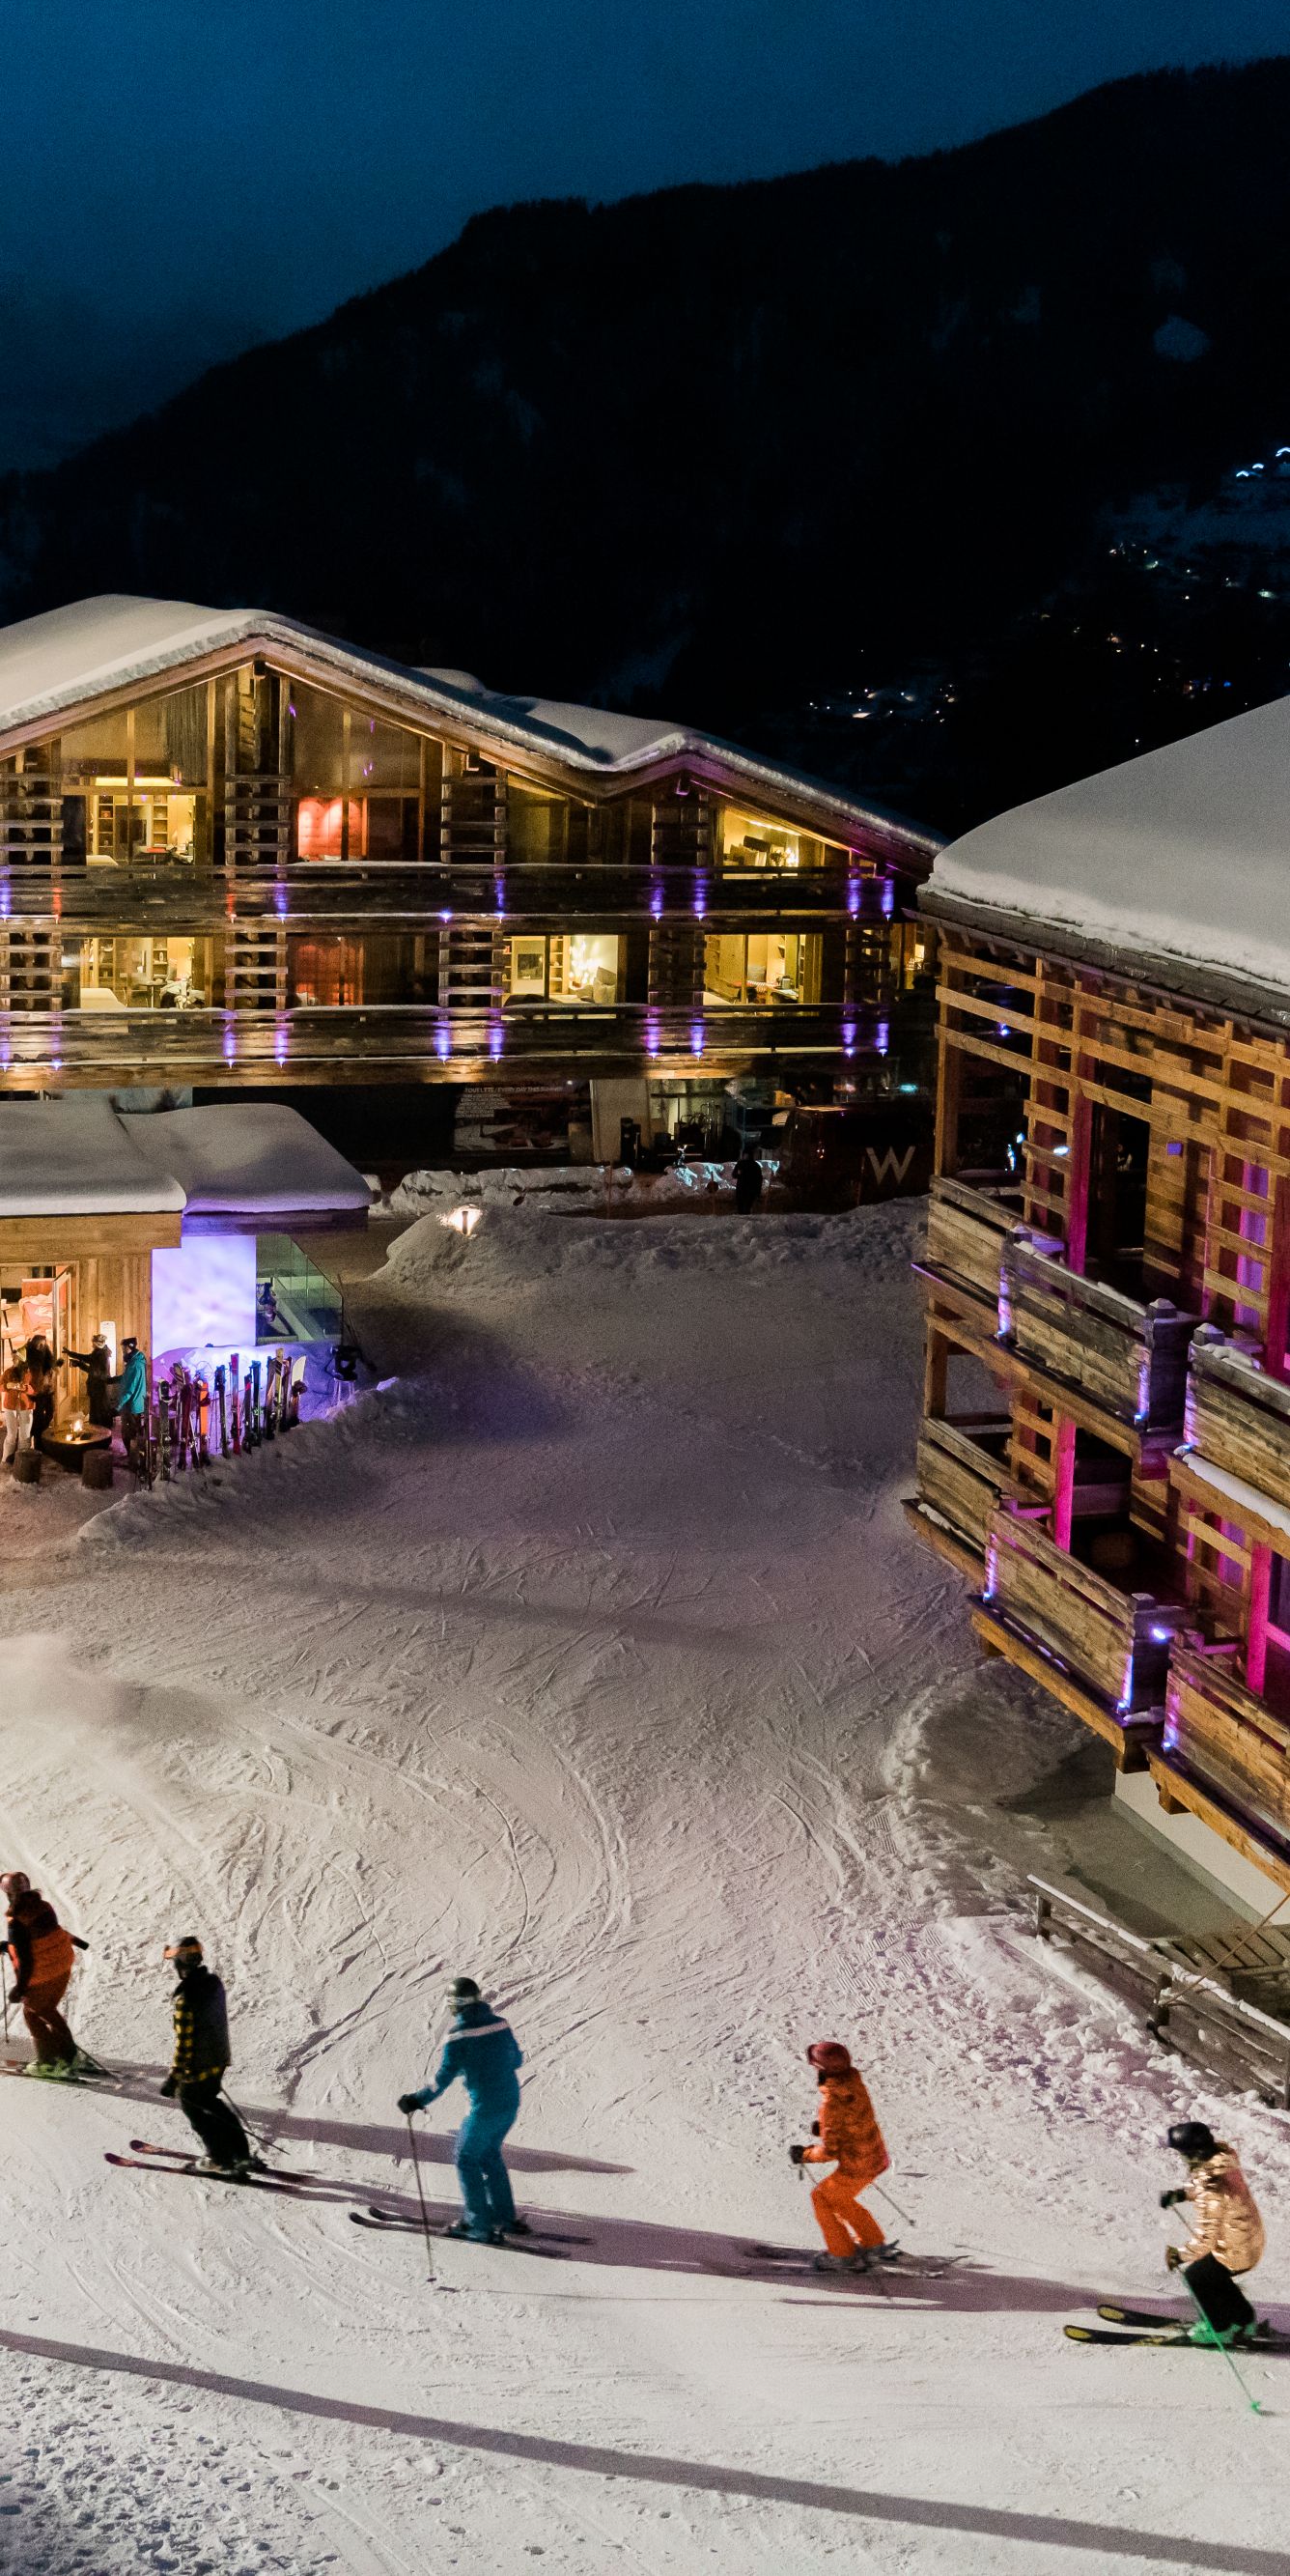 The Most Luxurious Ski Resorts in the World, According to a Report